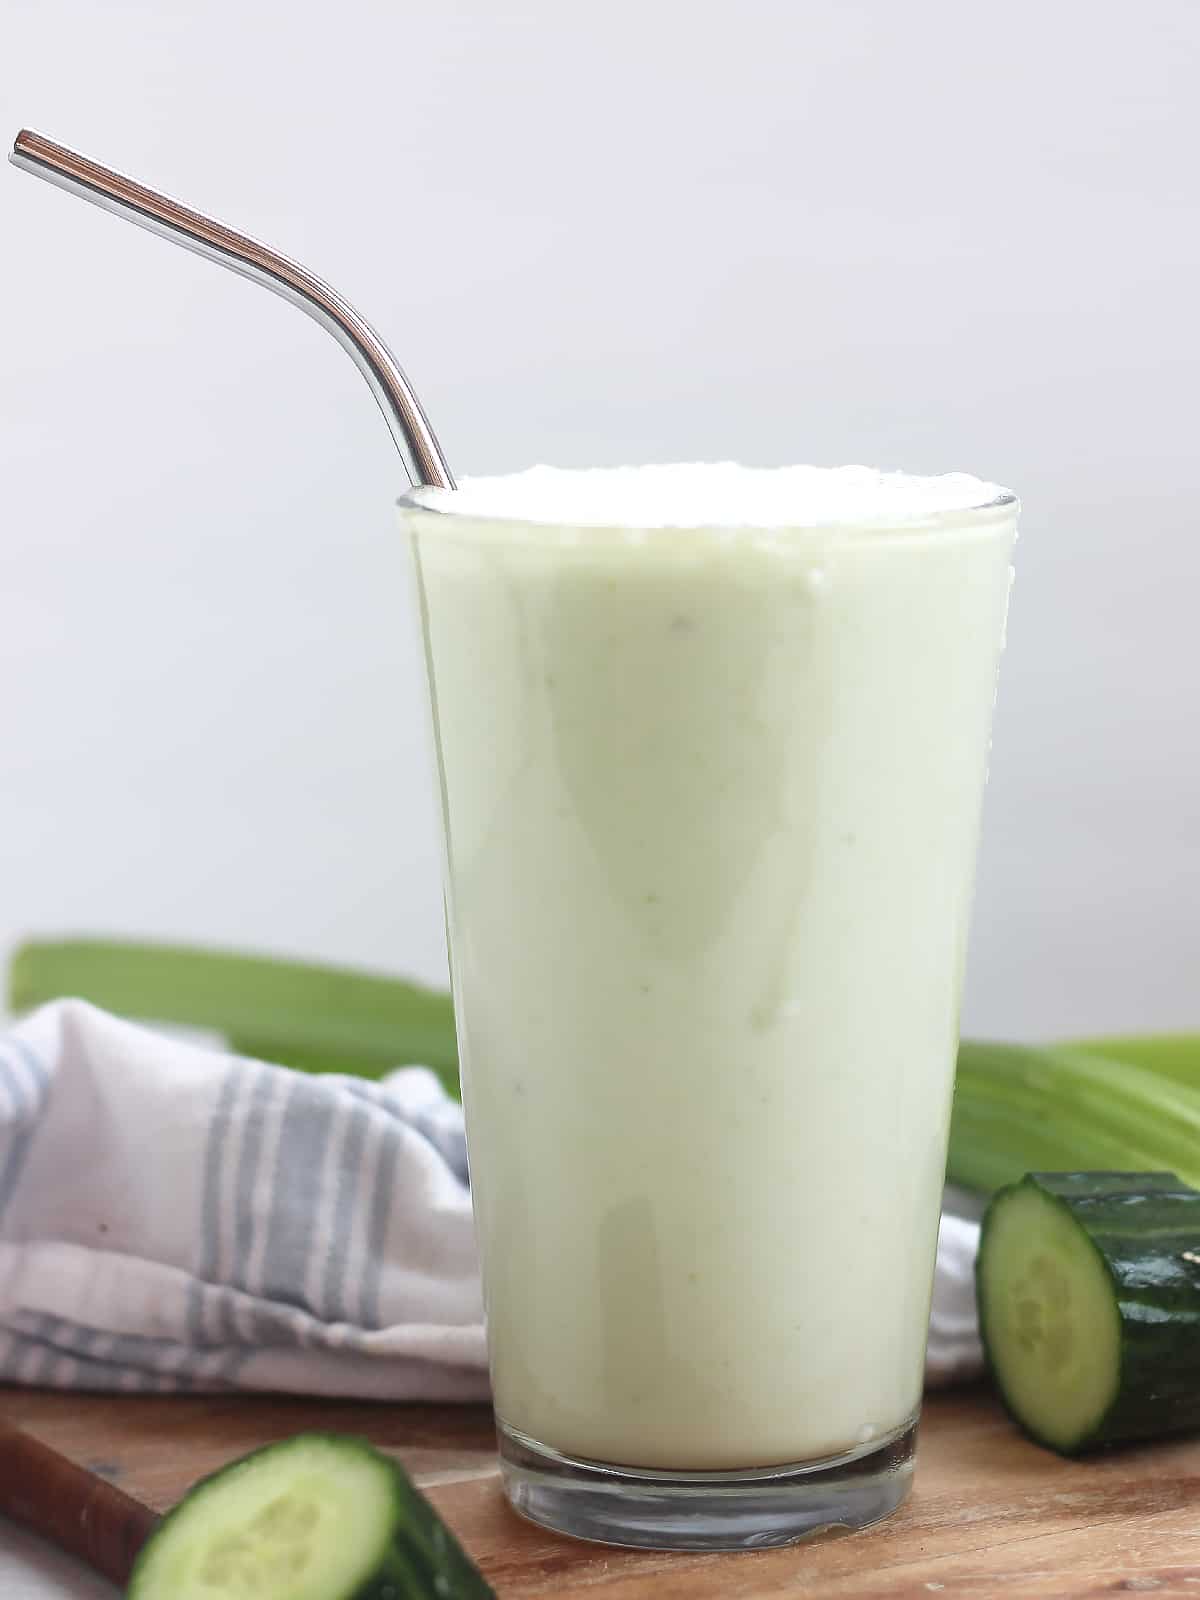 A celery cucumber and apple smoothie in a glass with a metal straw.